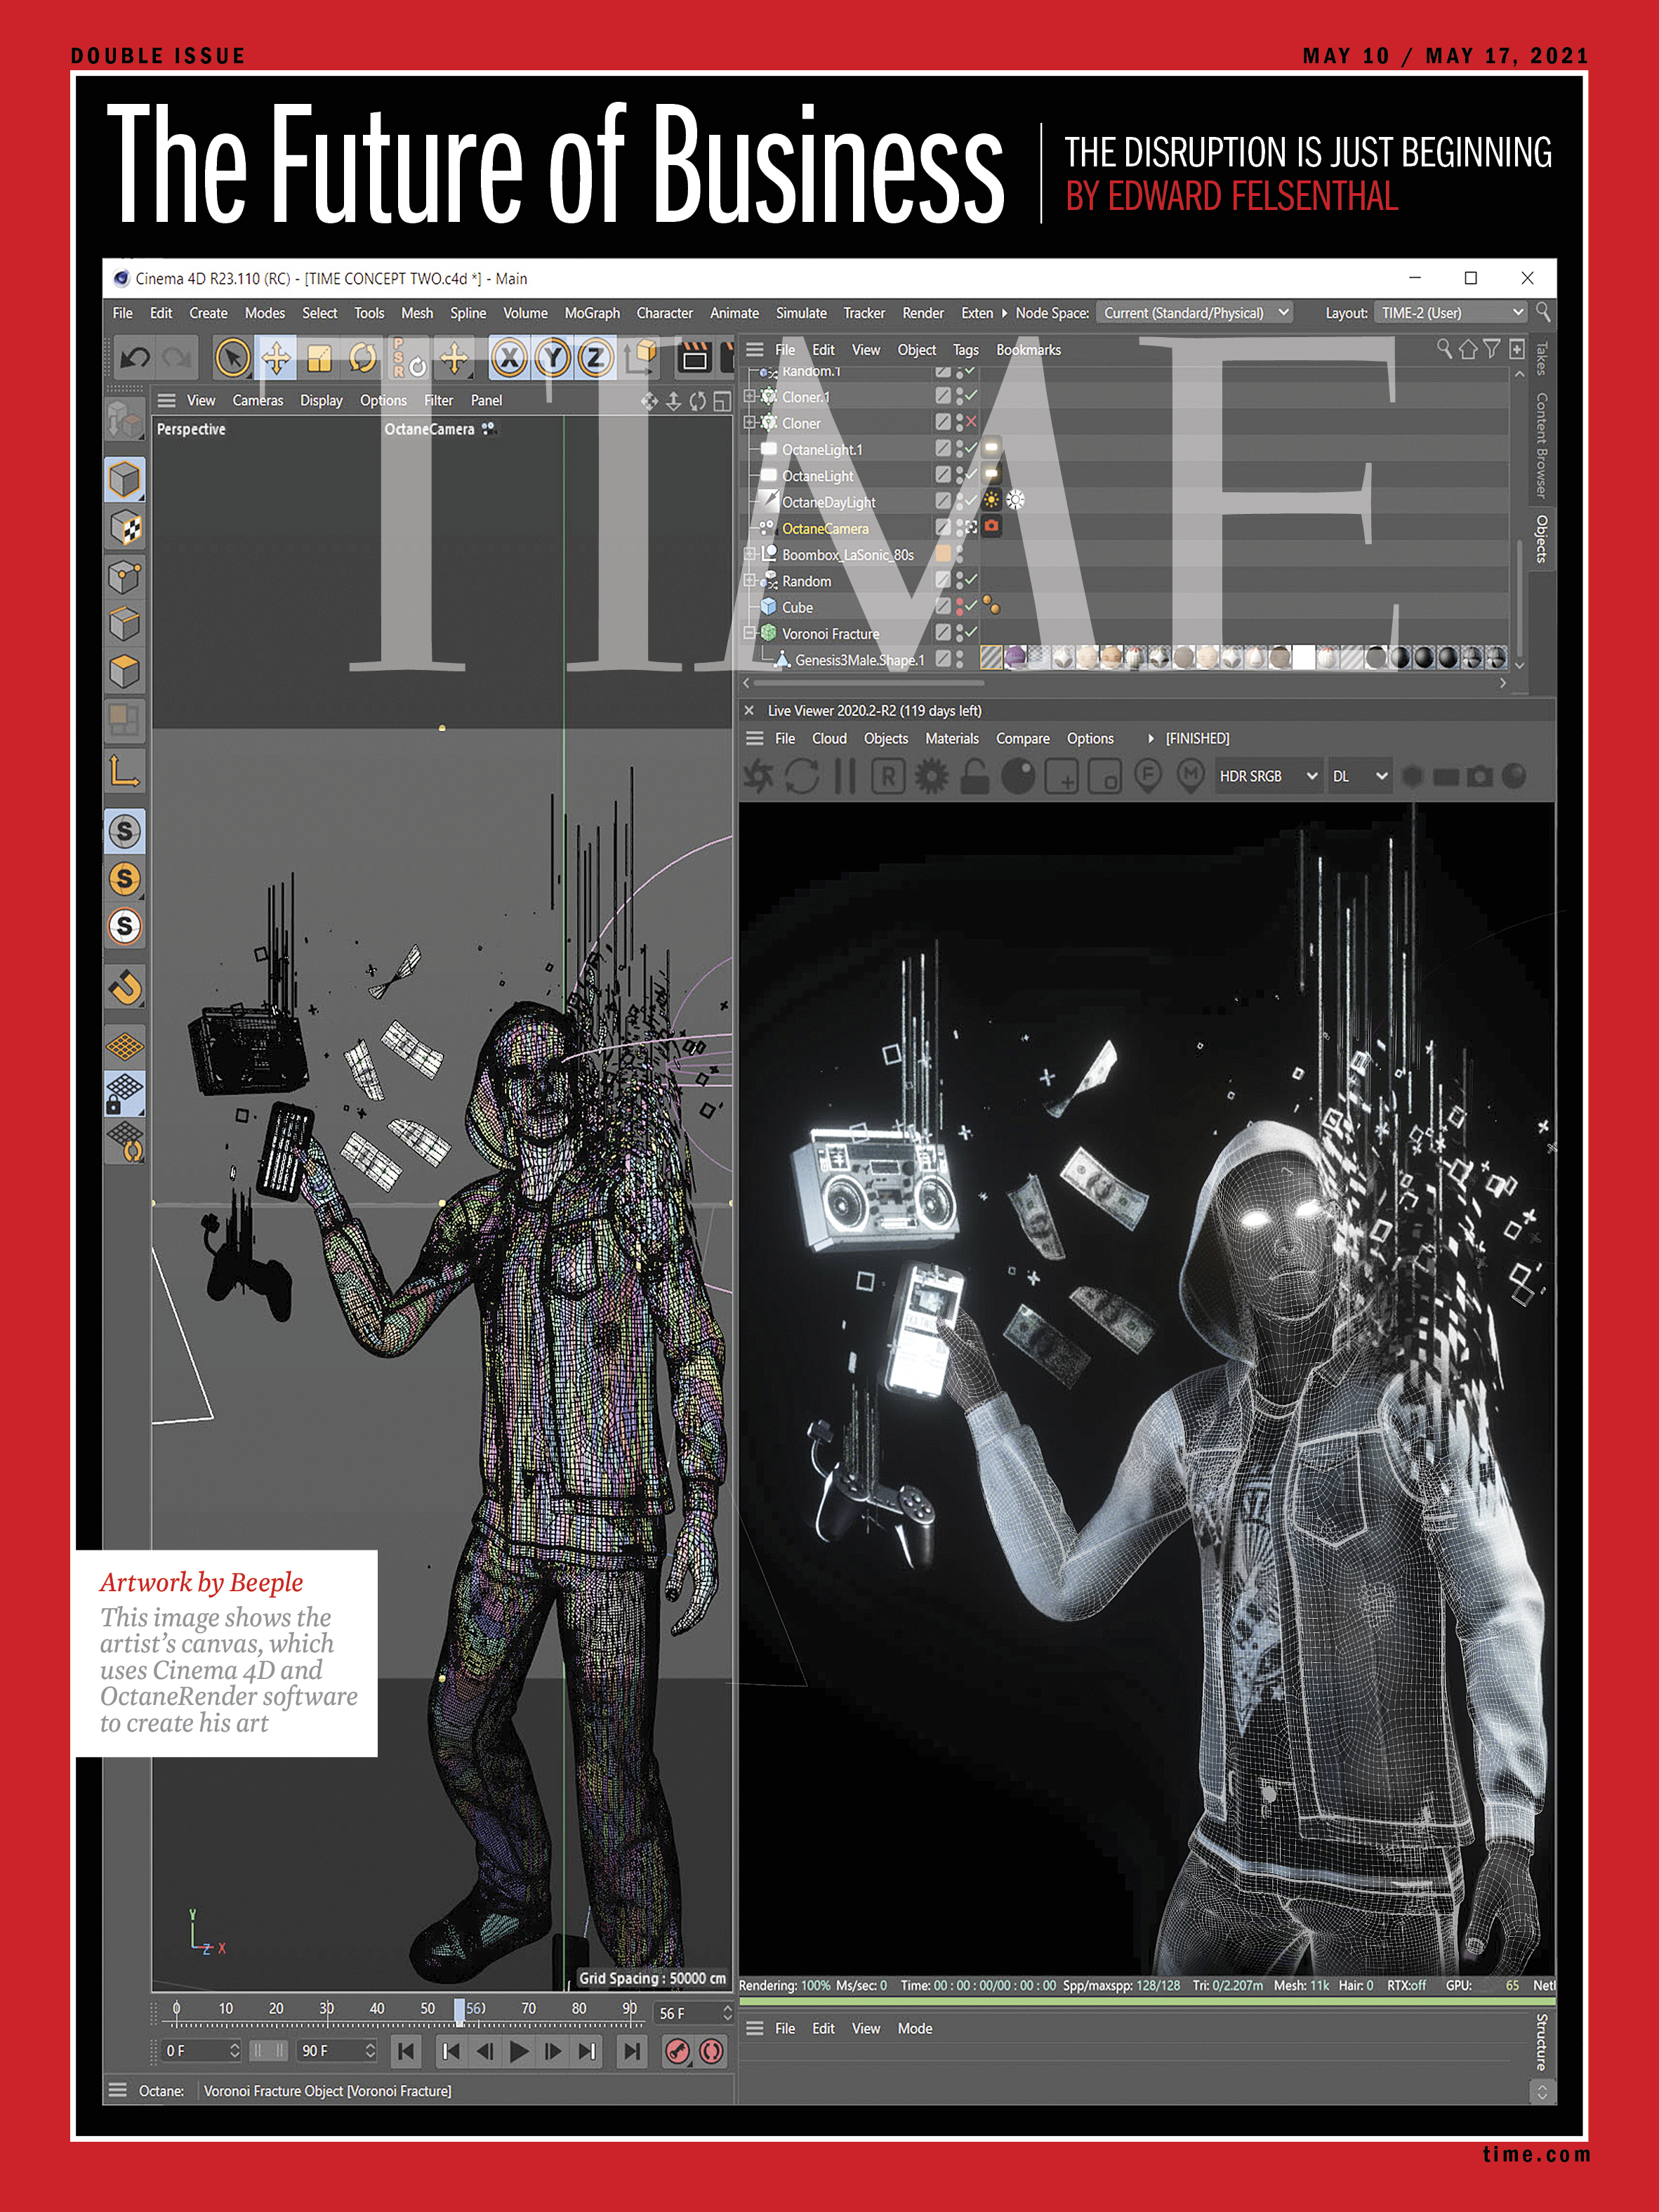 The Future of Business Time Magazine cover